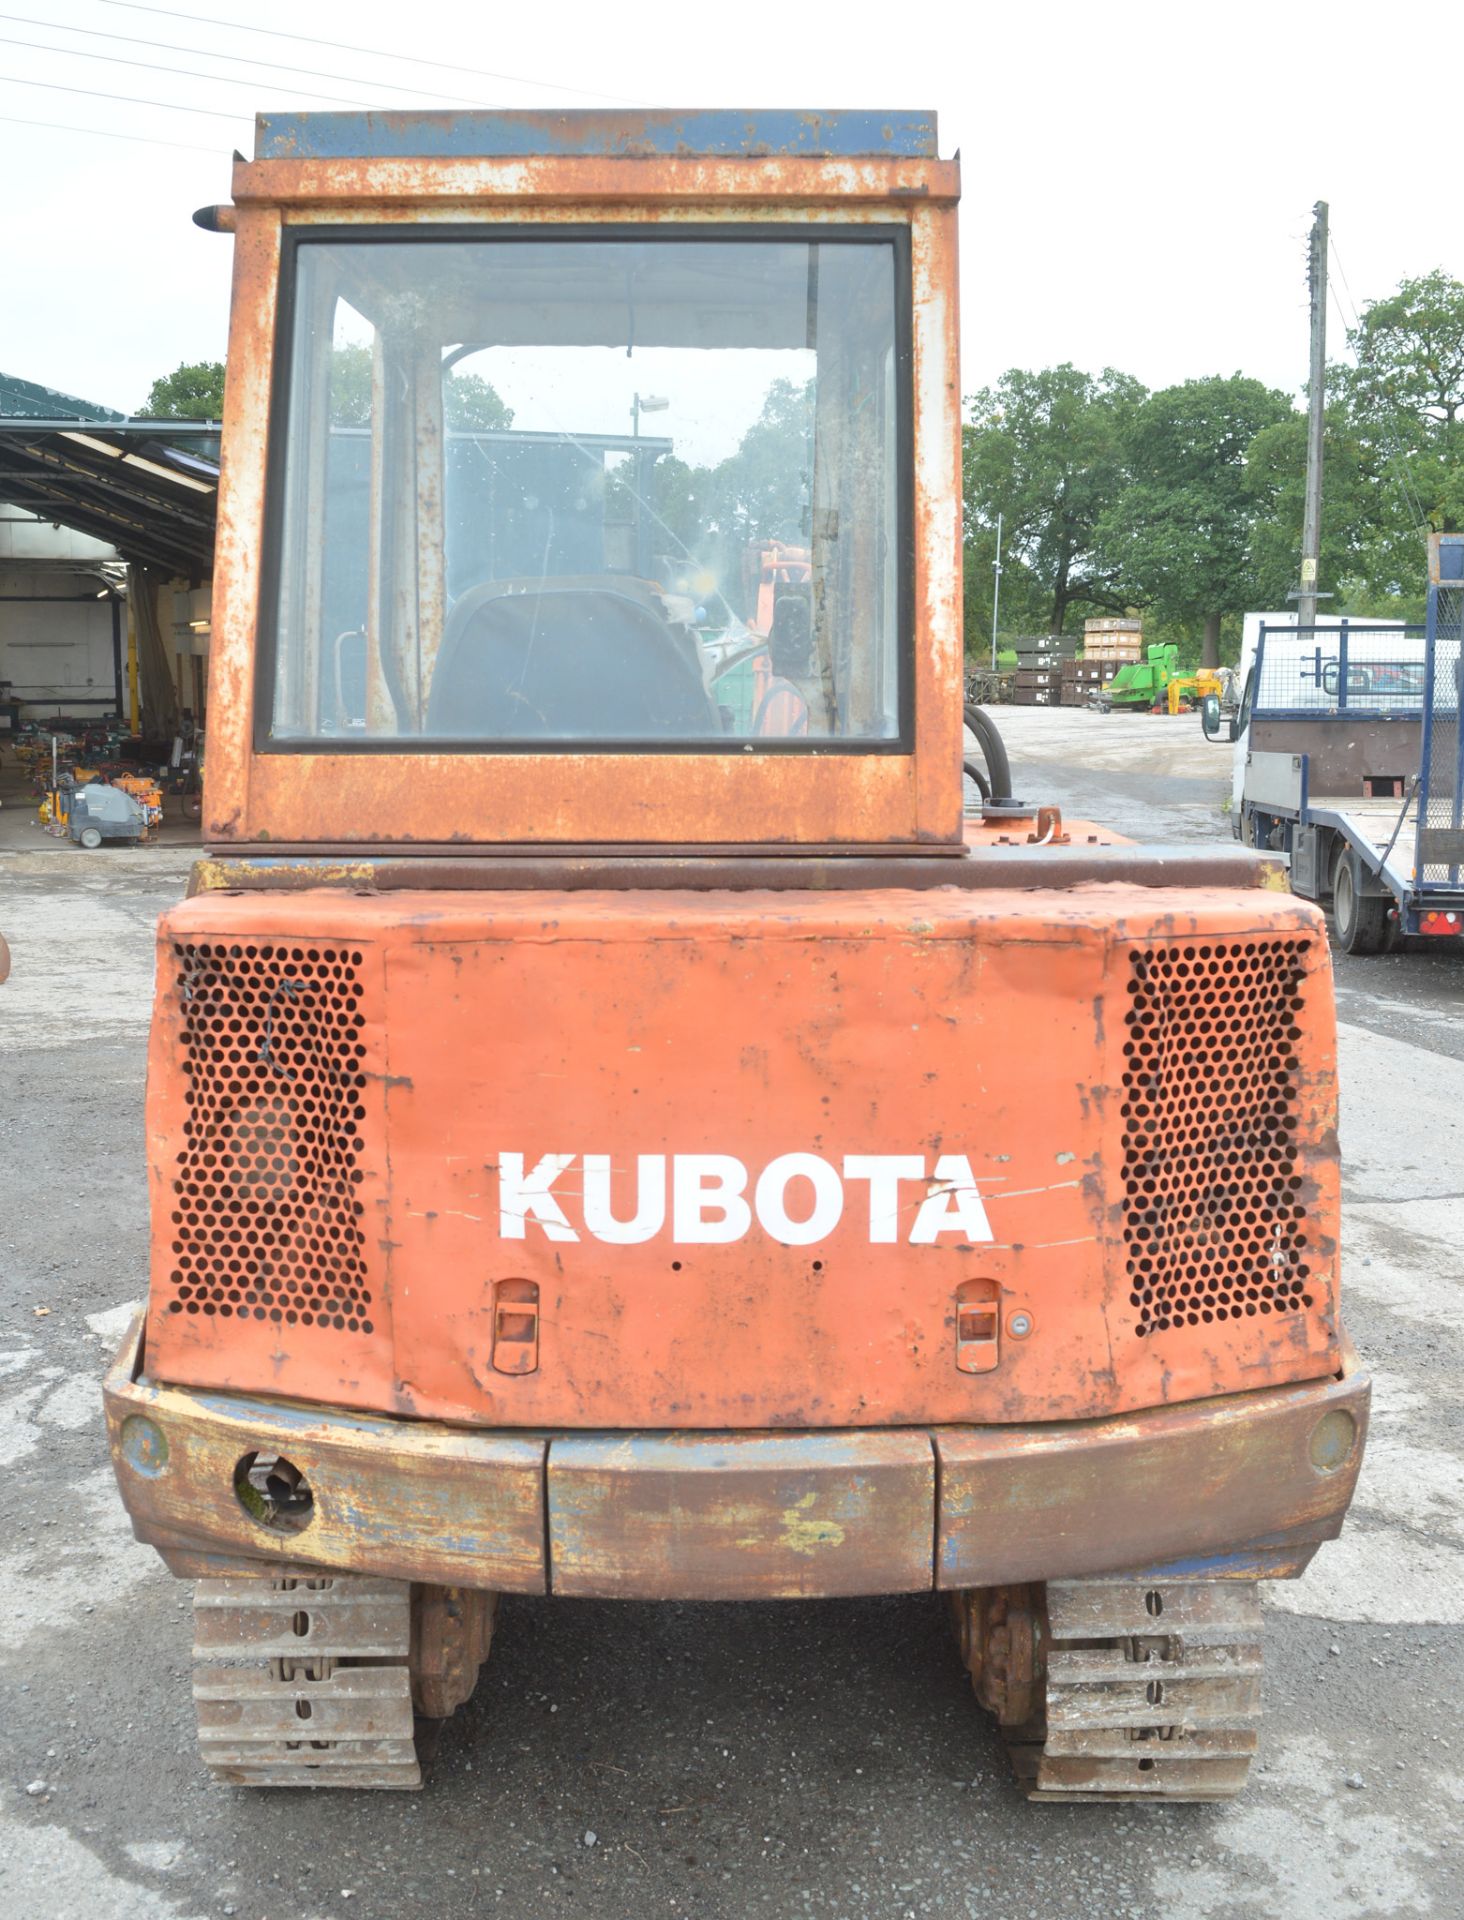 Kubota KH-66 2.8 tonne steel tracked mini digger  Year:  S/N: 13242 Recorded hours: 3422 c/w bucket, - Image 5 of 13